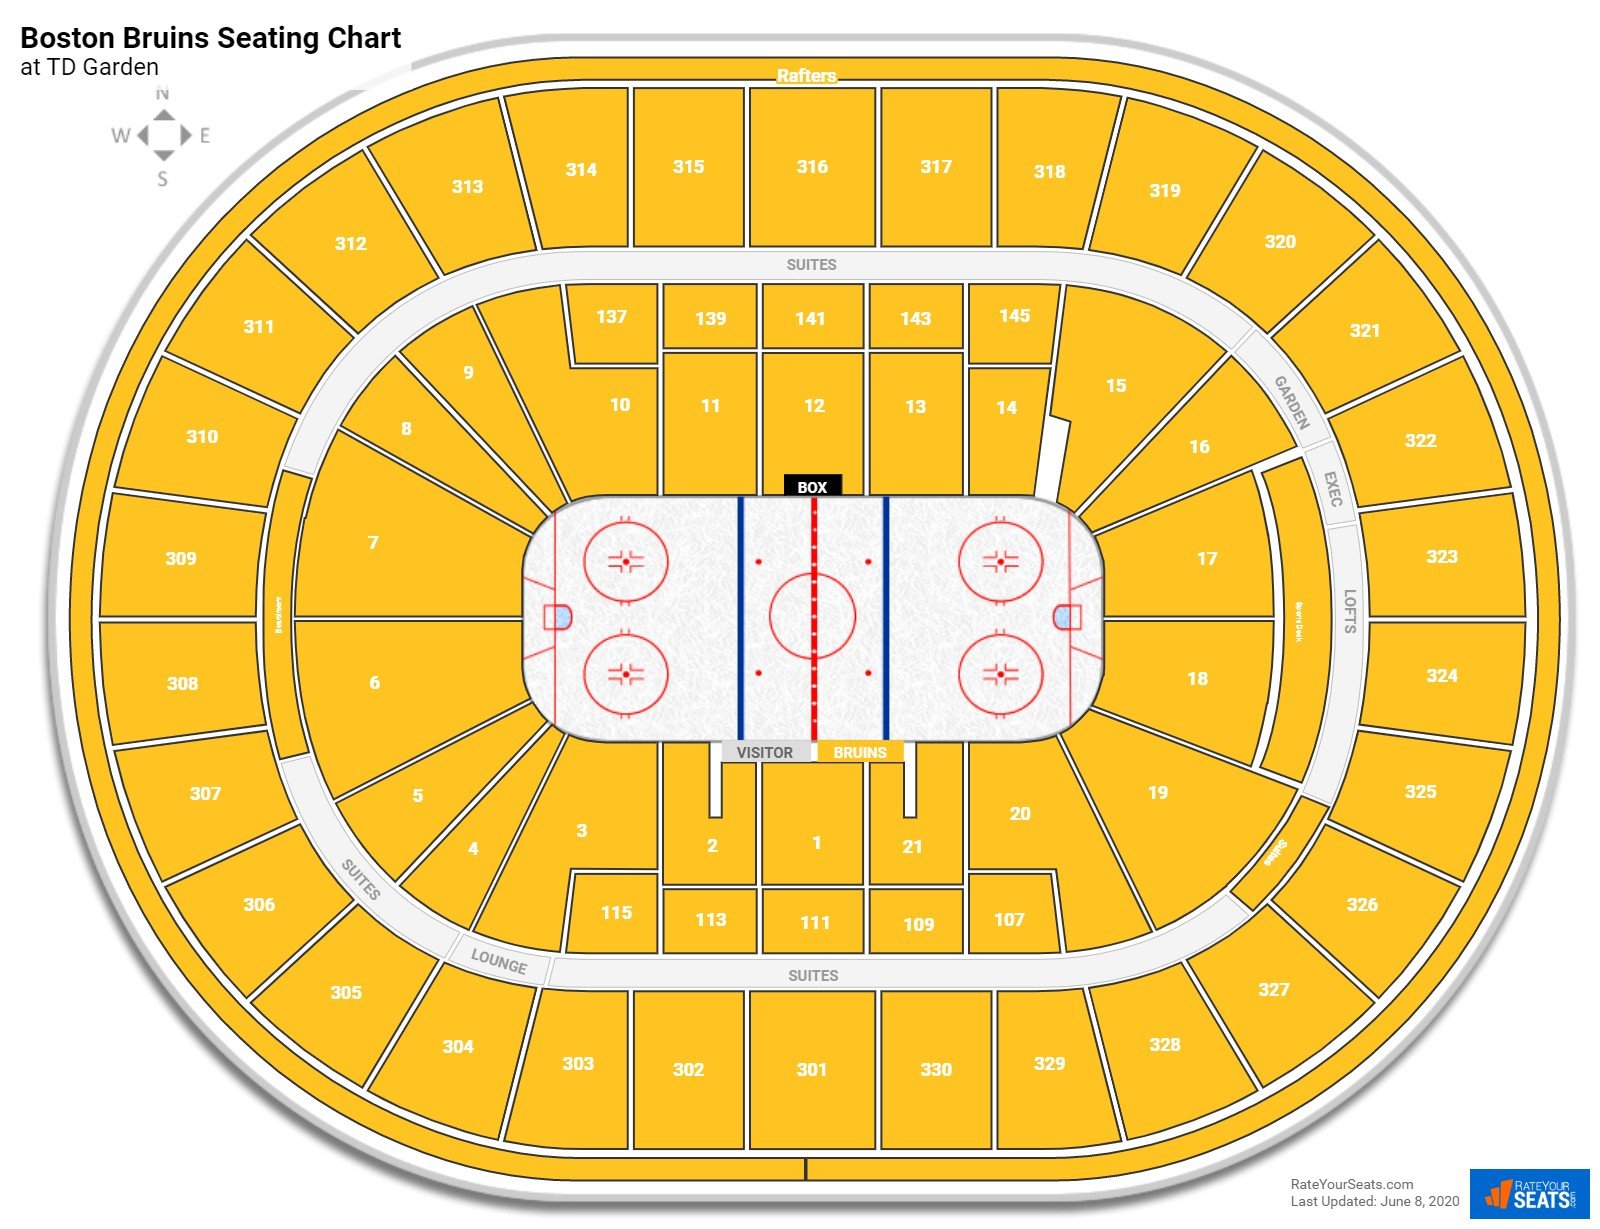 Boston Bruins Seating Charts At Td Garden Rateyourseats Com